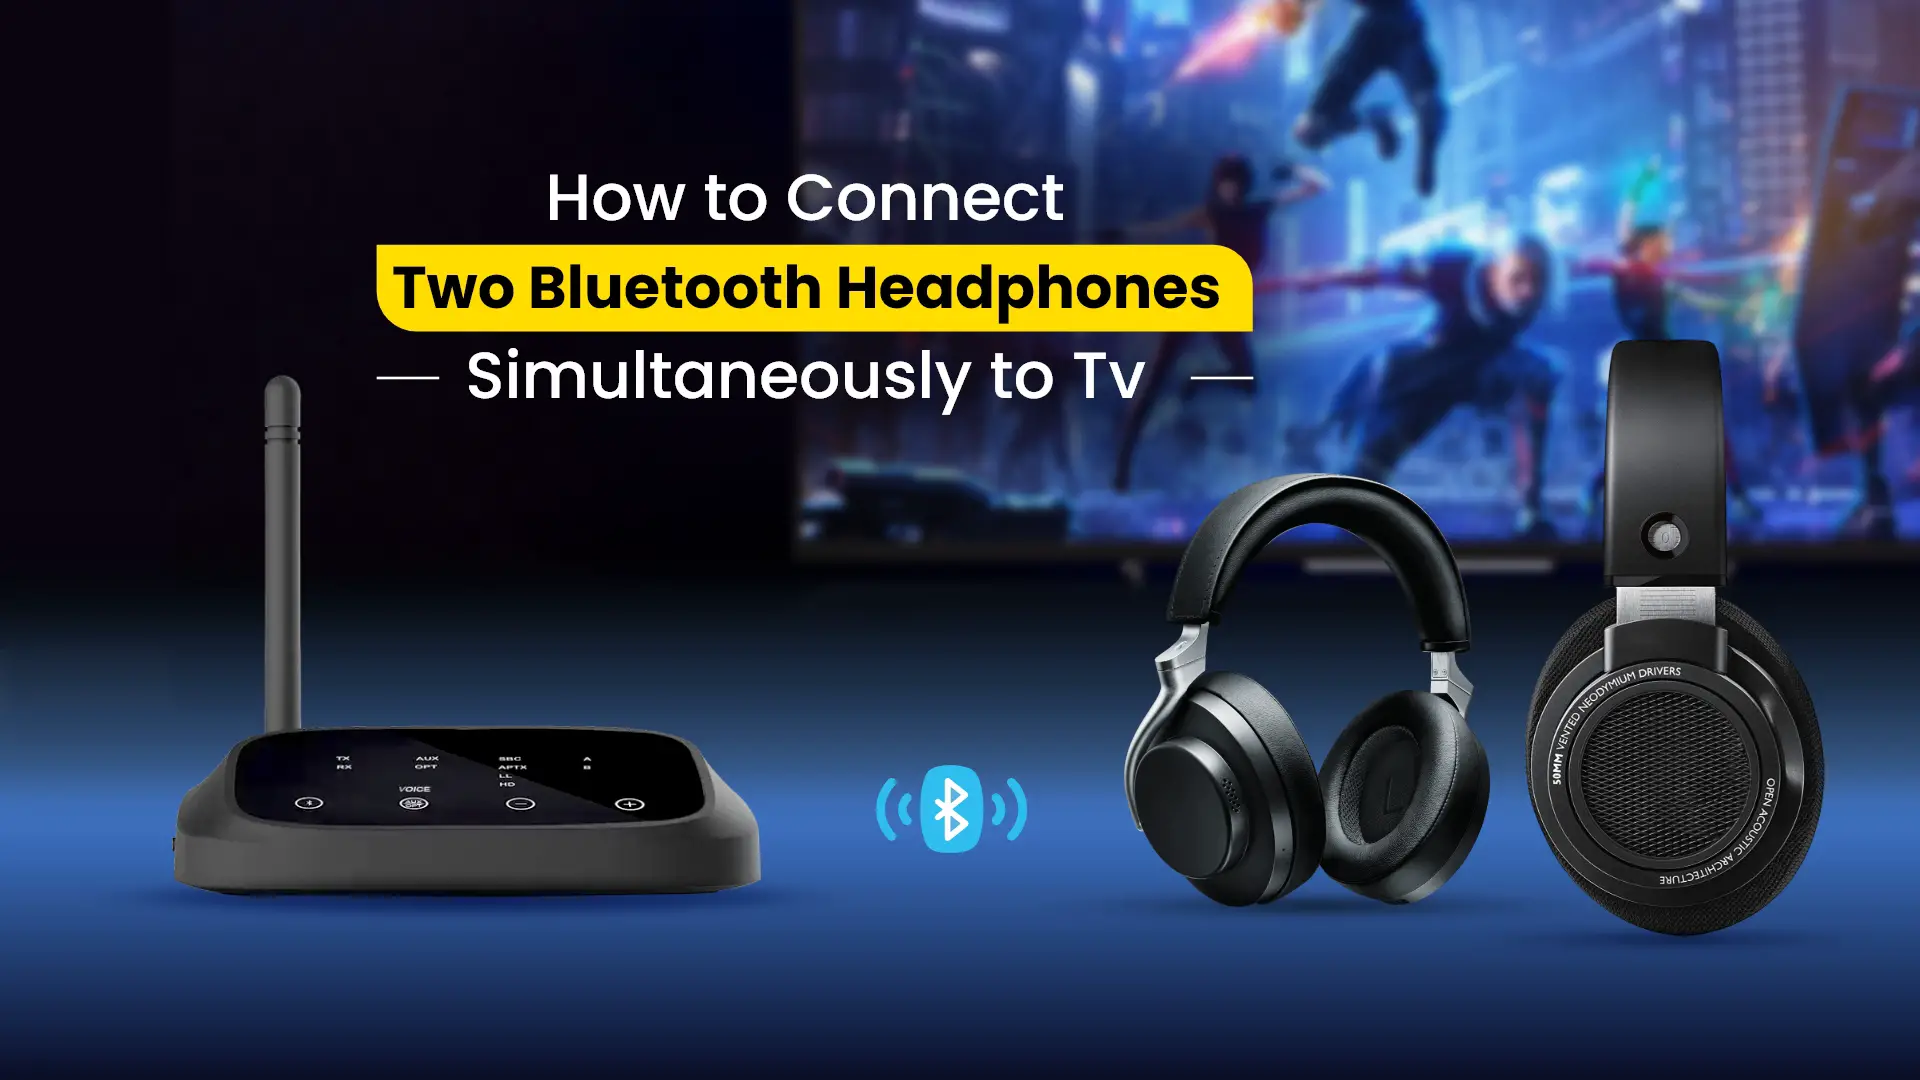 How to Connect Two Bluetooth Headphones Simultaneously to TV – Apple TV, Samsung TV, and Others